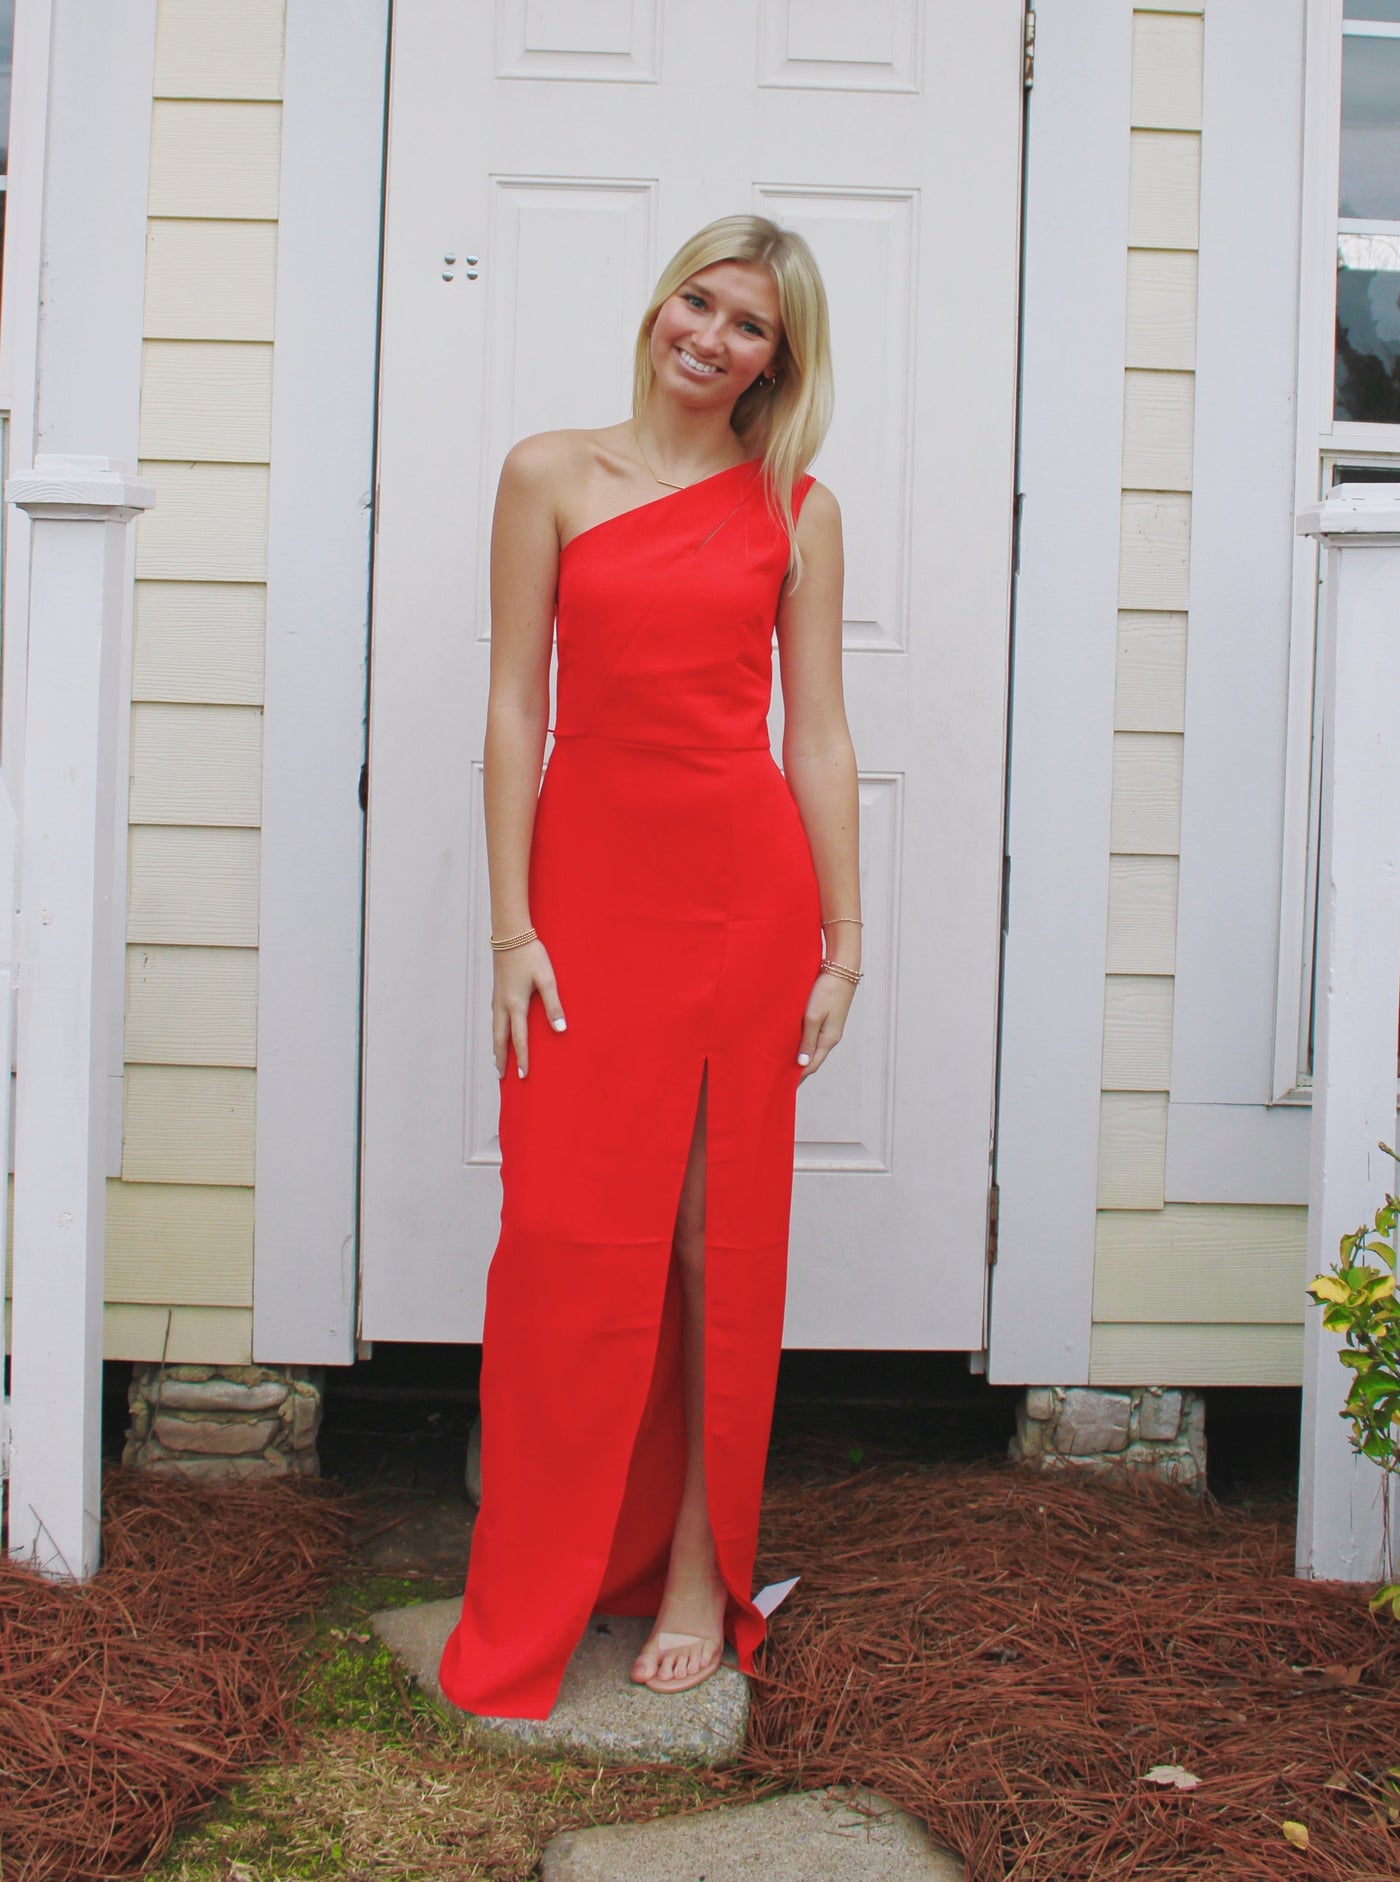 Joie Gown - Red